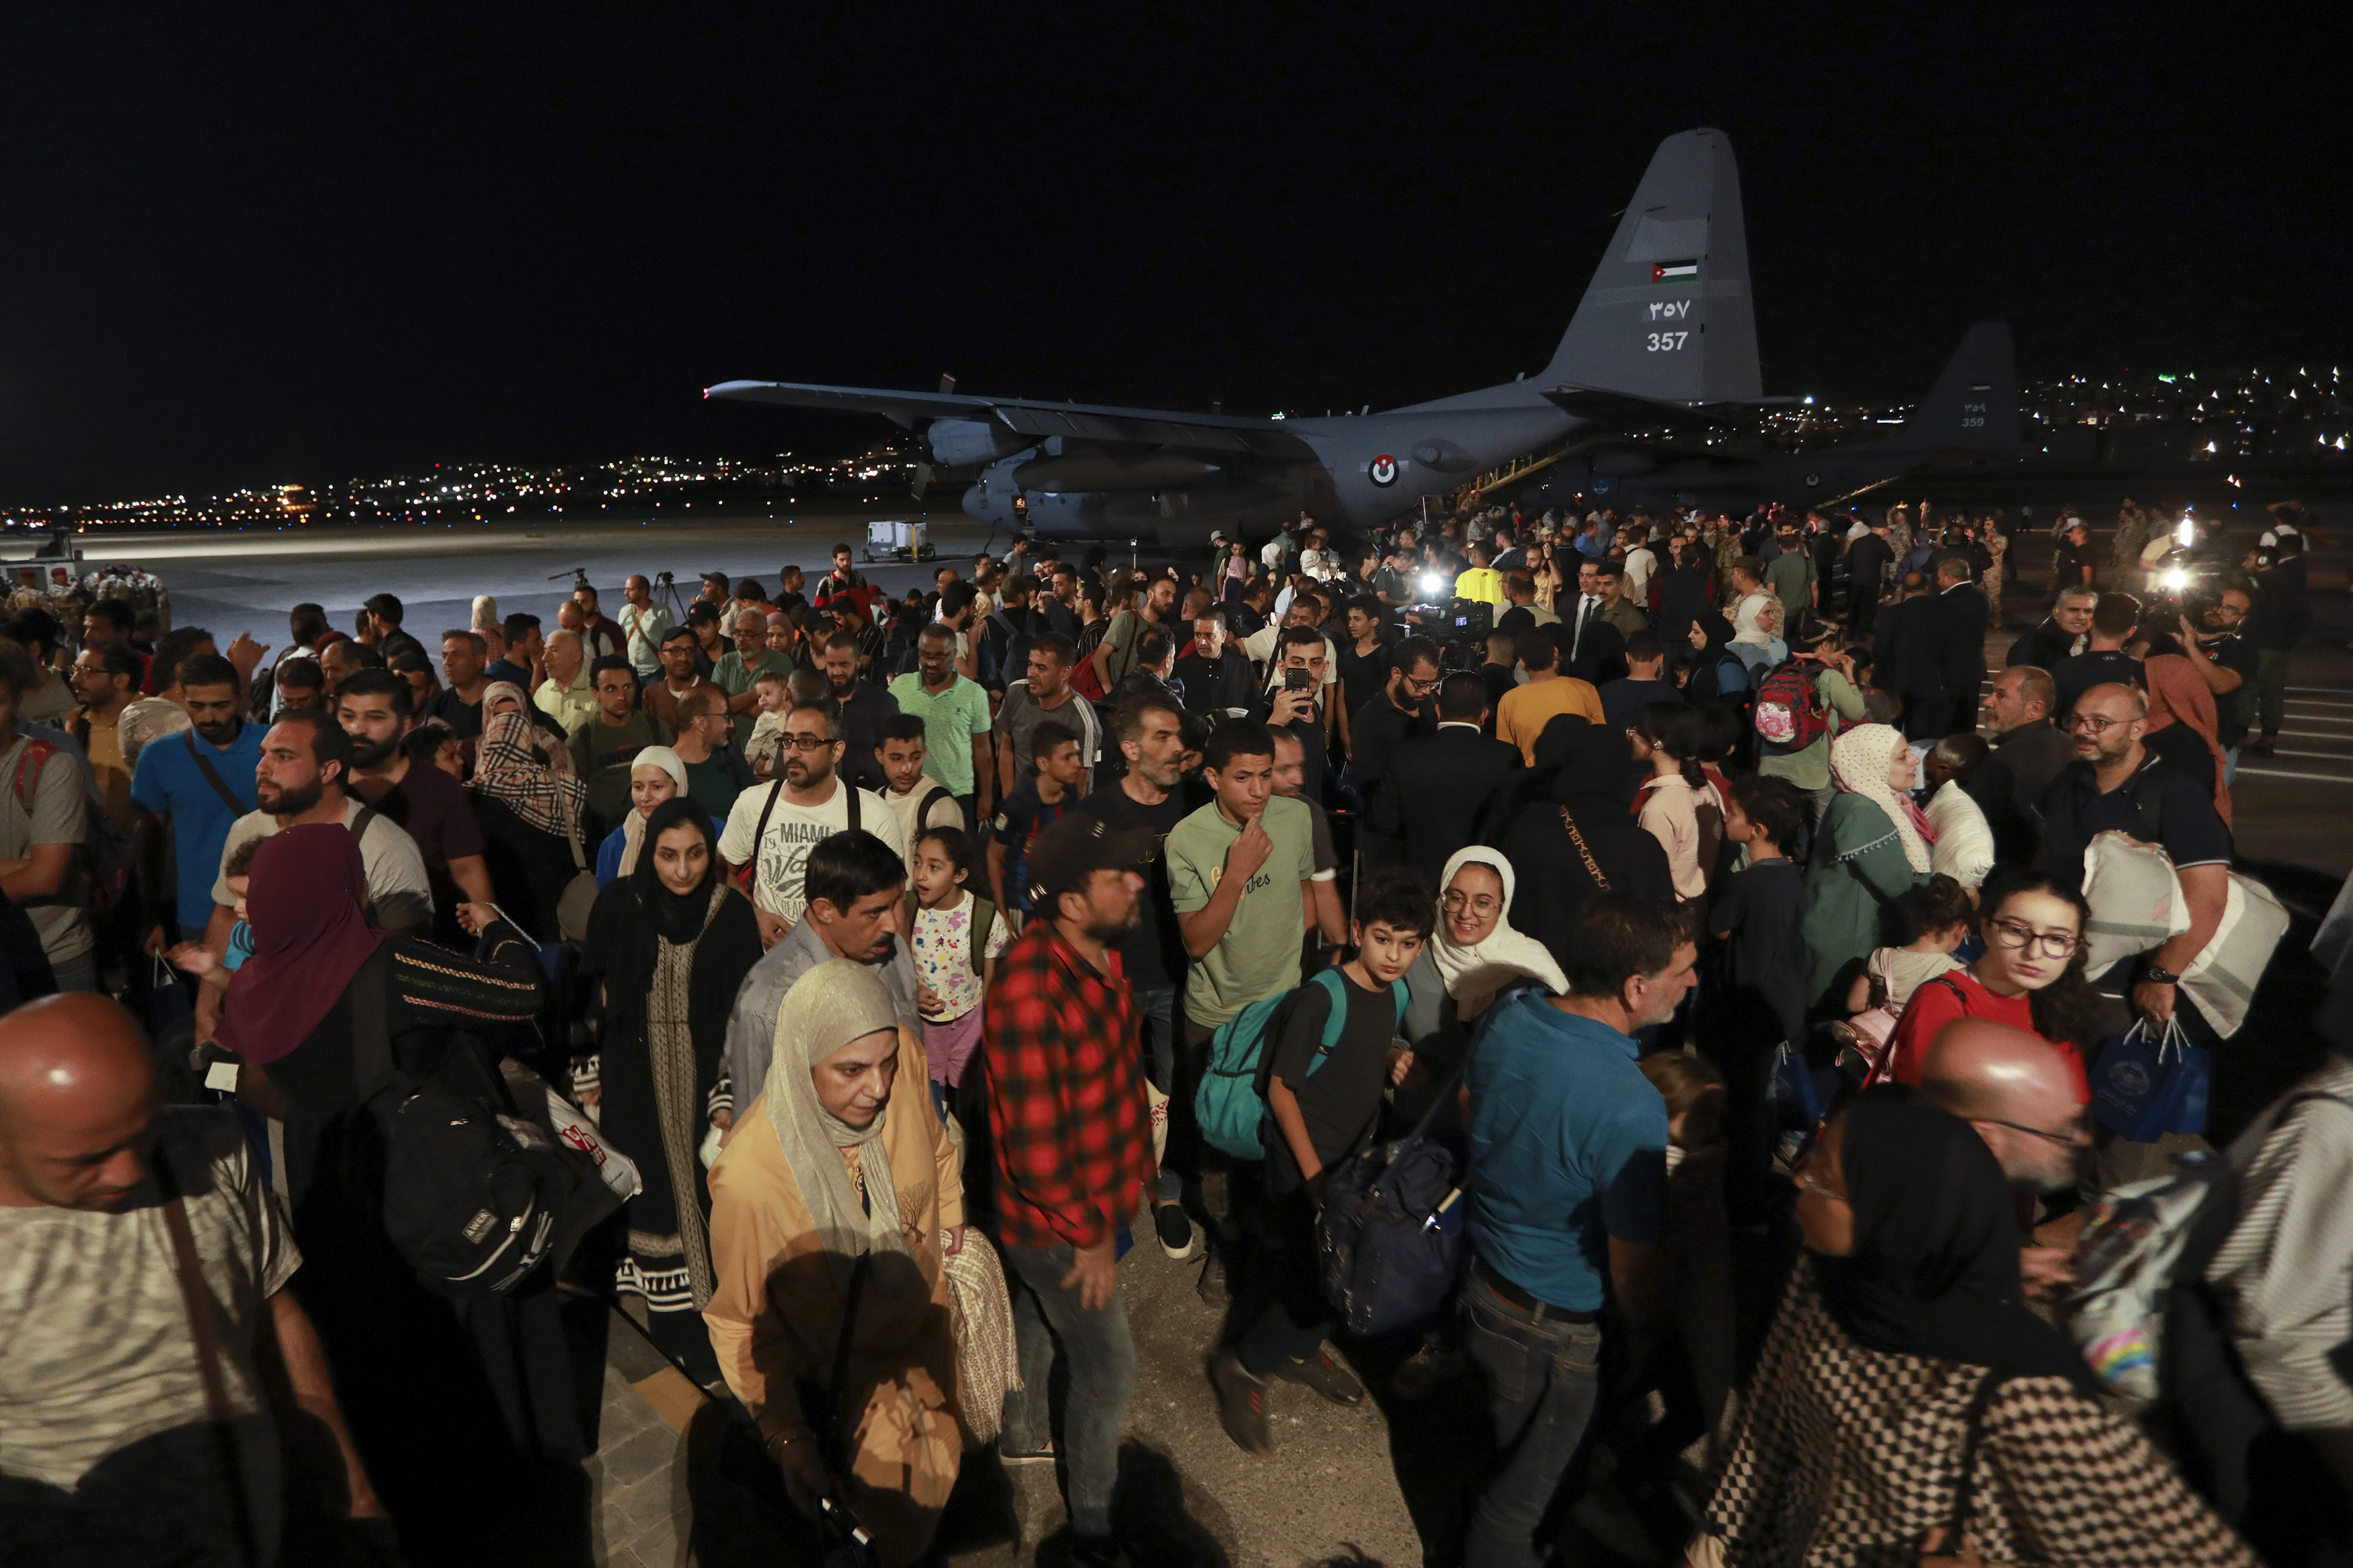 This image shows evacuees from Sudan arriving at a military airport in Jordan